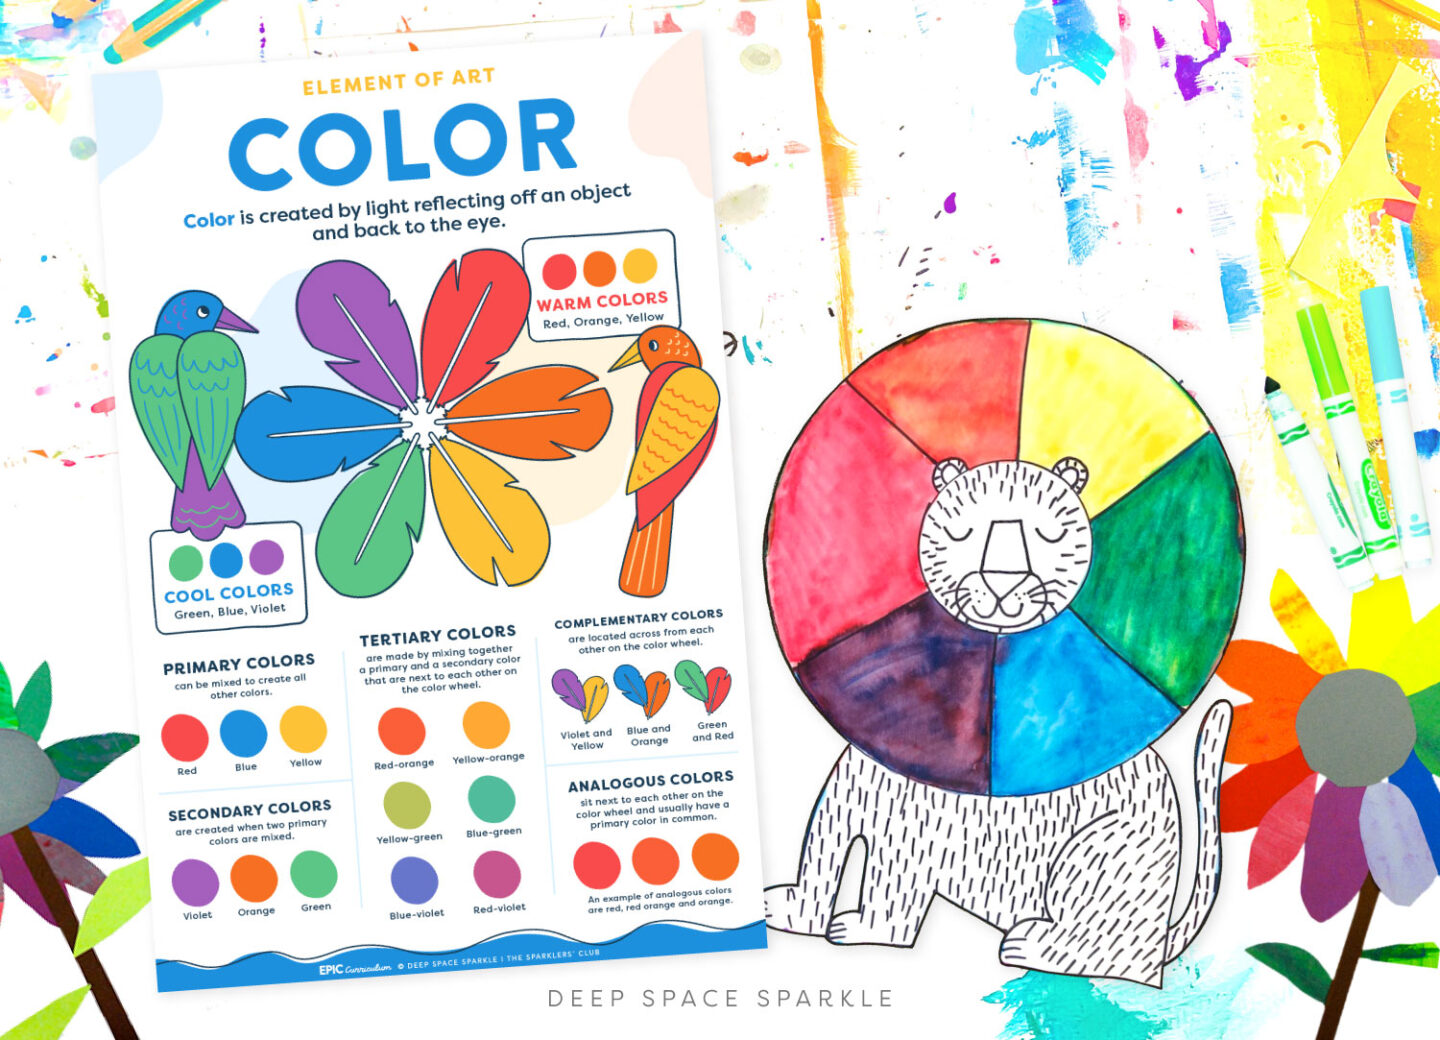 Artwork about Primary and Secondary Colors | Umbrella Color Wheel - YouTube